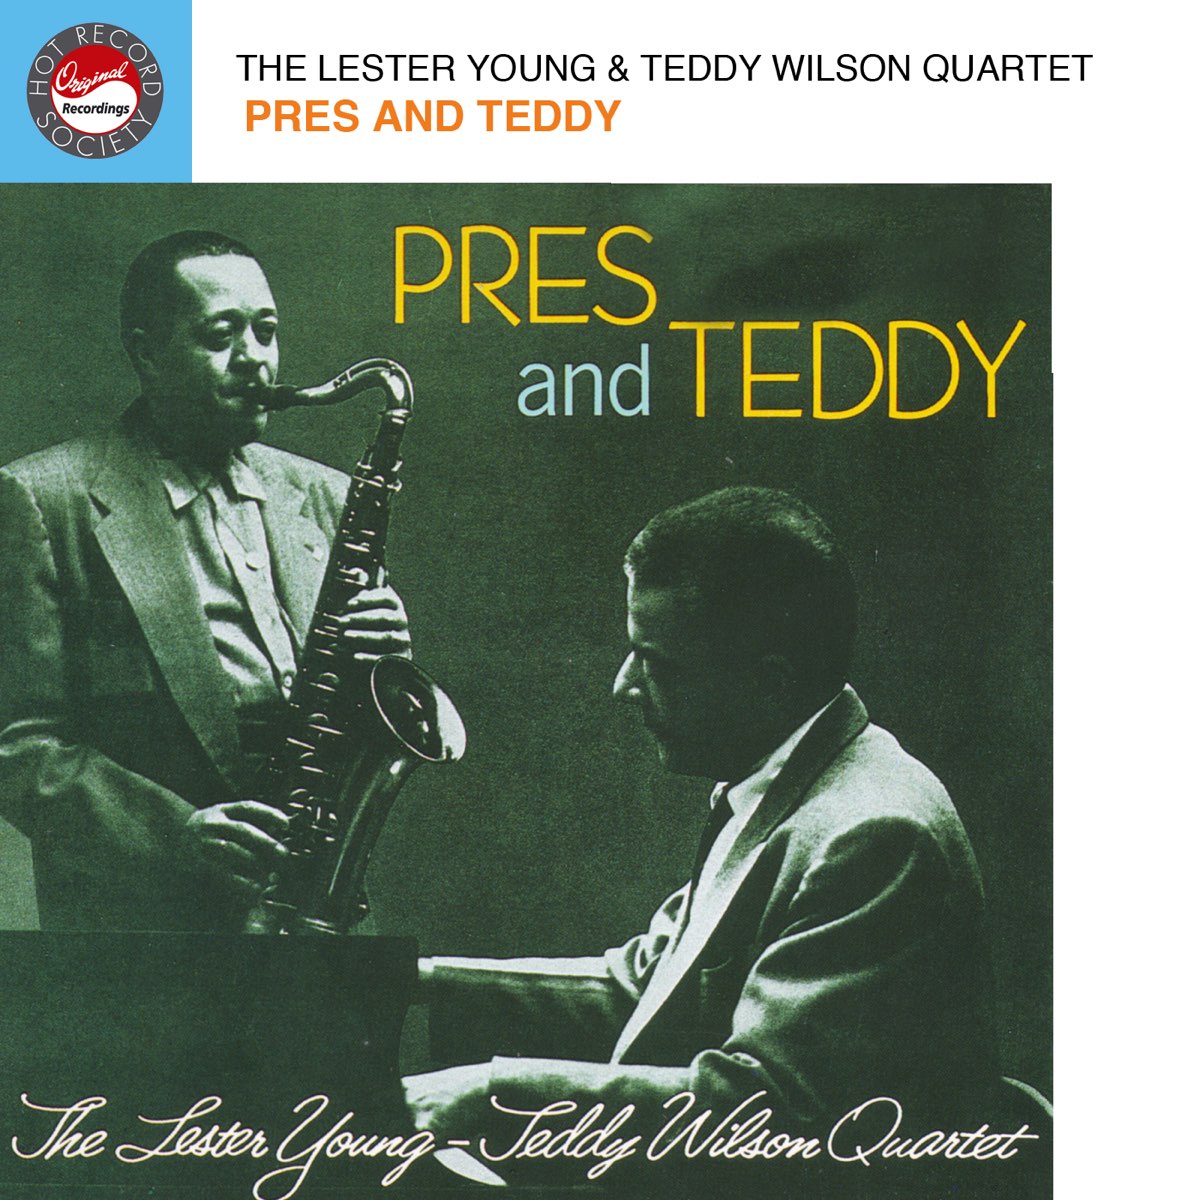 Pres & Teddy - The Lester Young & Teddy Wilson Quartetのアルバム ...